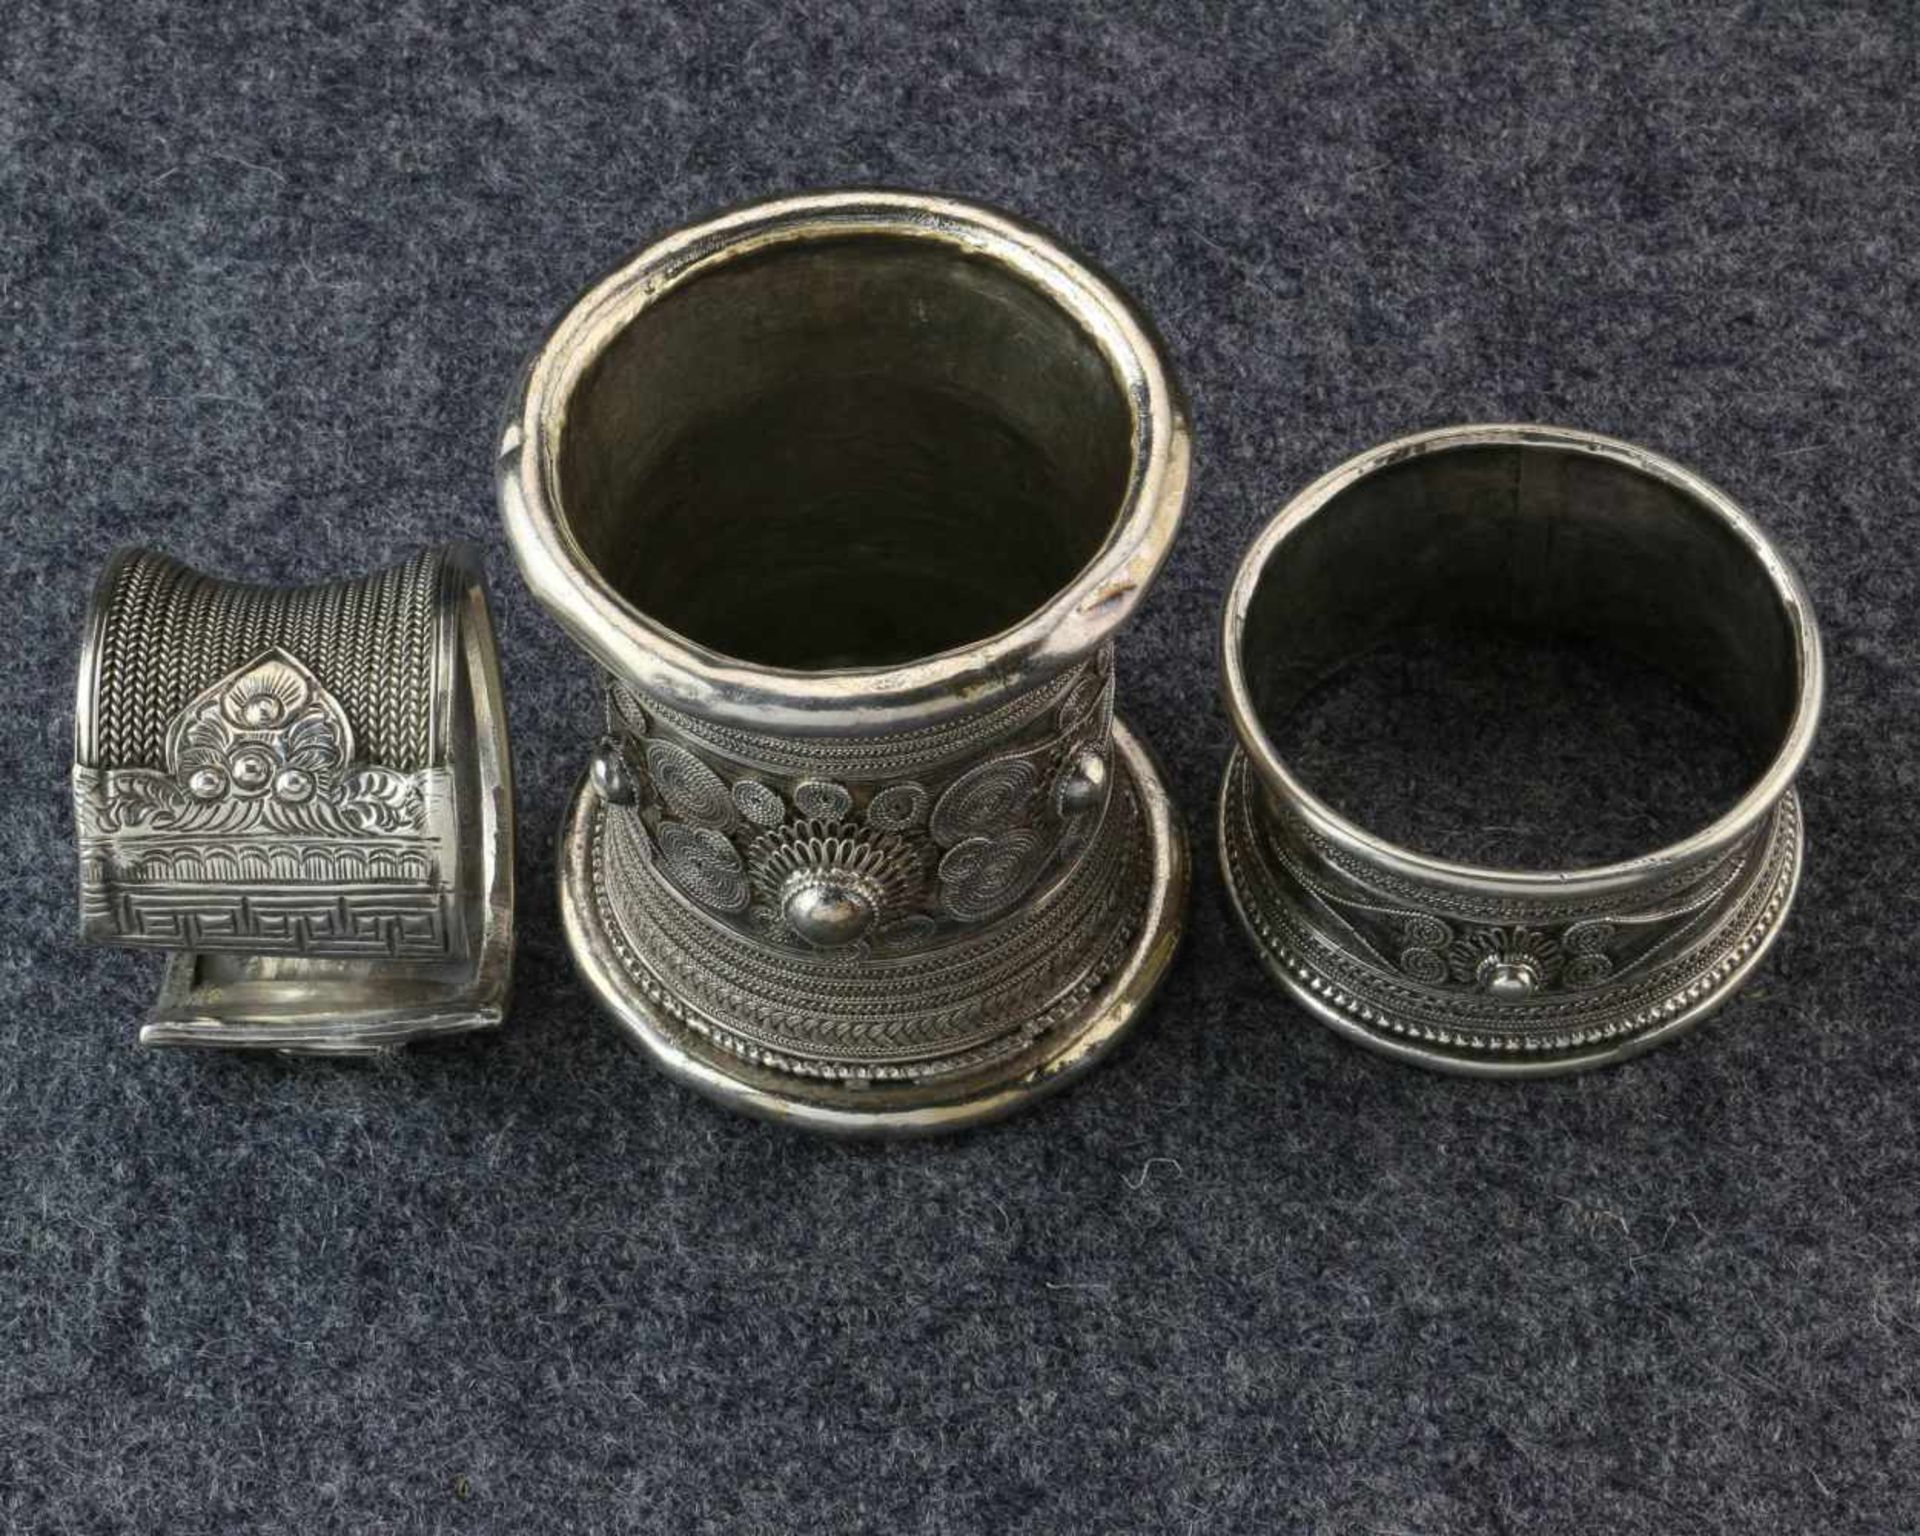 Golden Triangle, Myanmar, three silver bracelets;the tubular ones are adorned with floral and